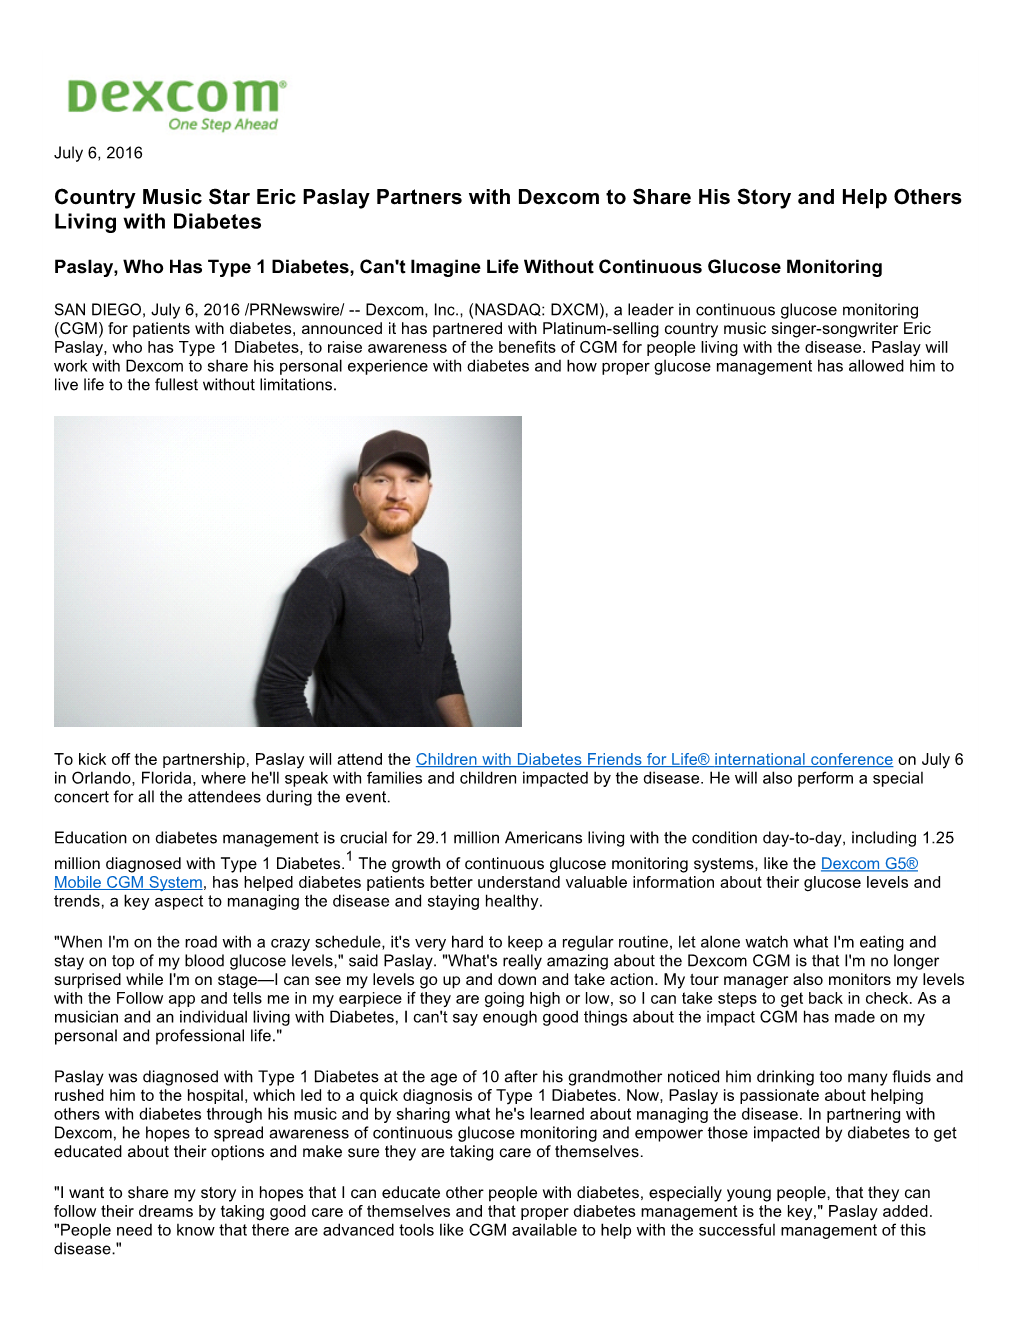 Country Music Star Eric Paslay Partners with Dexcom to Share His Story and Help Others Living with Diabetes